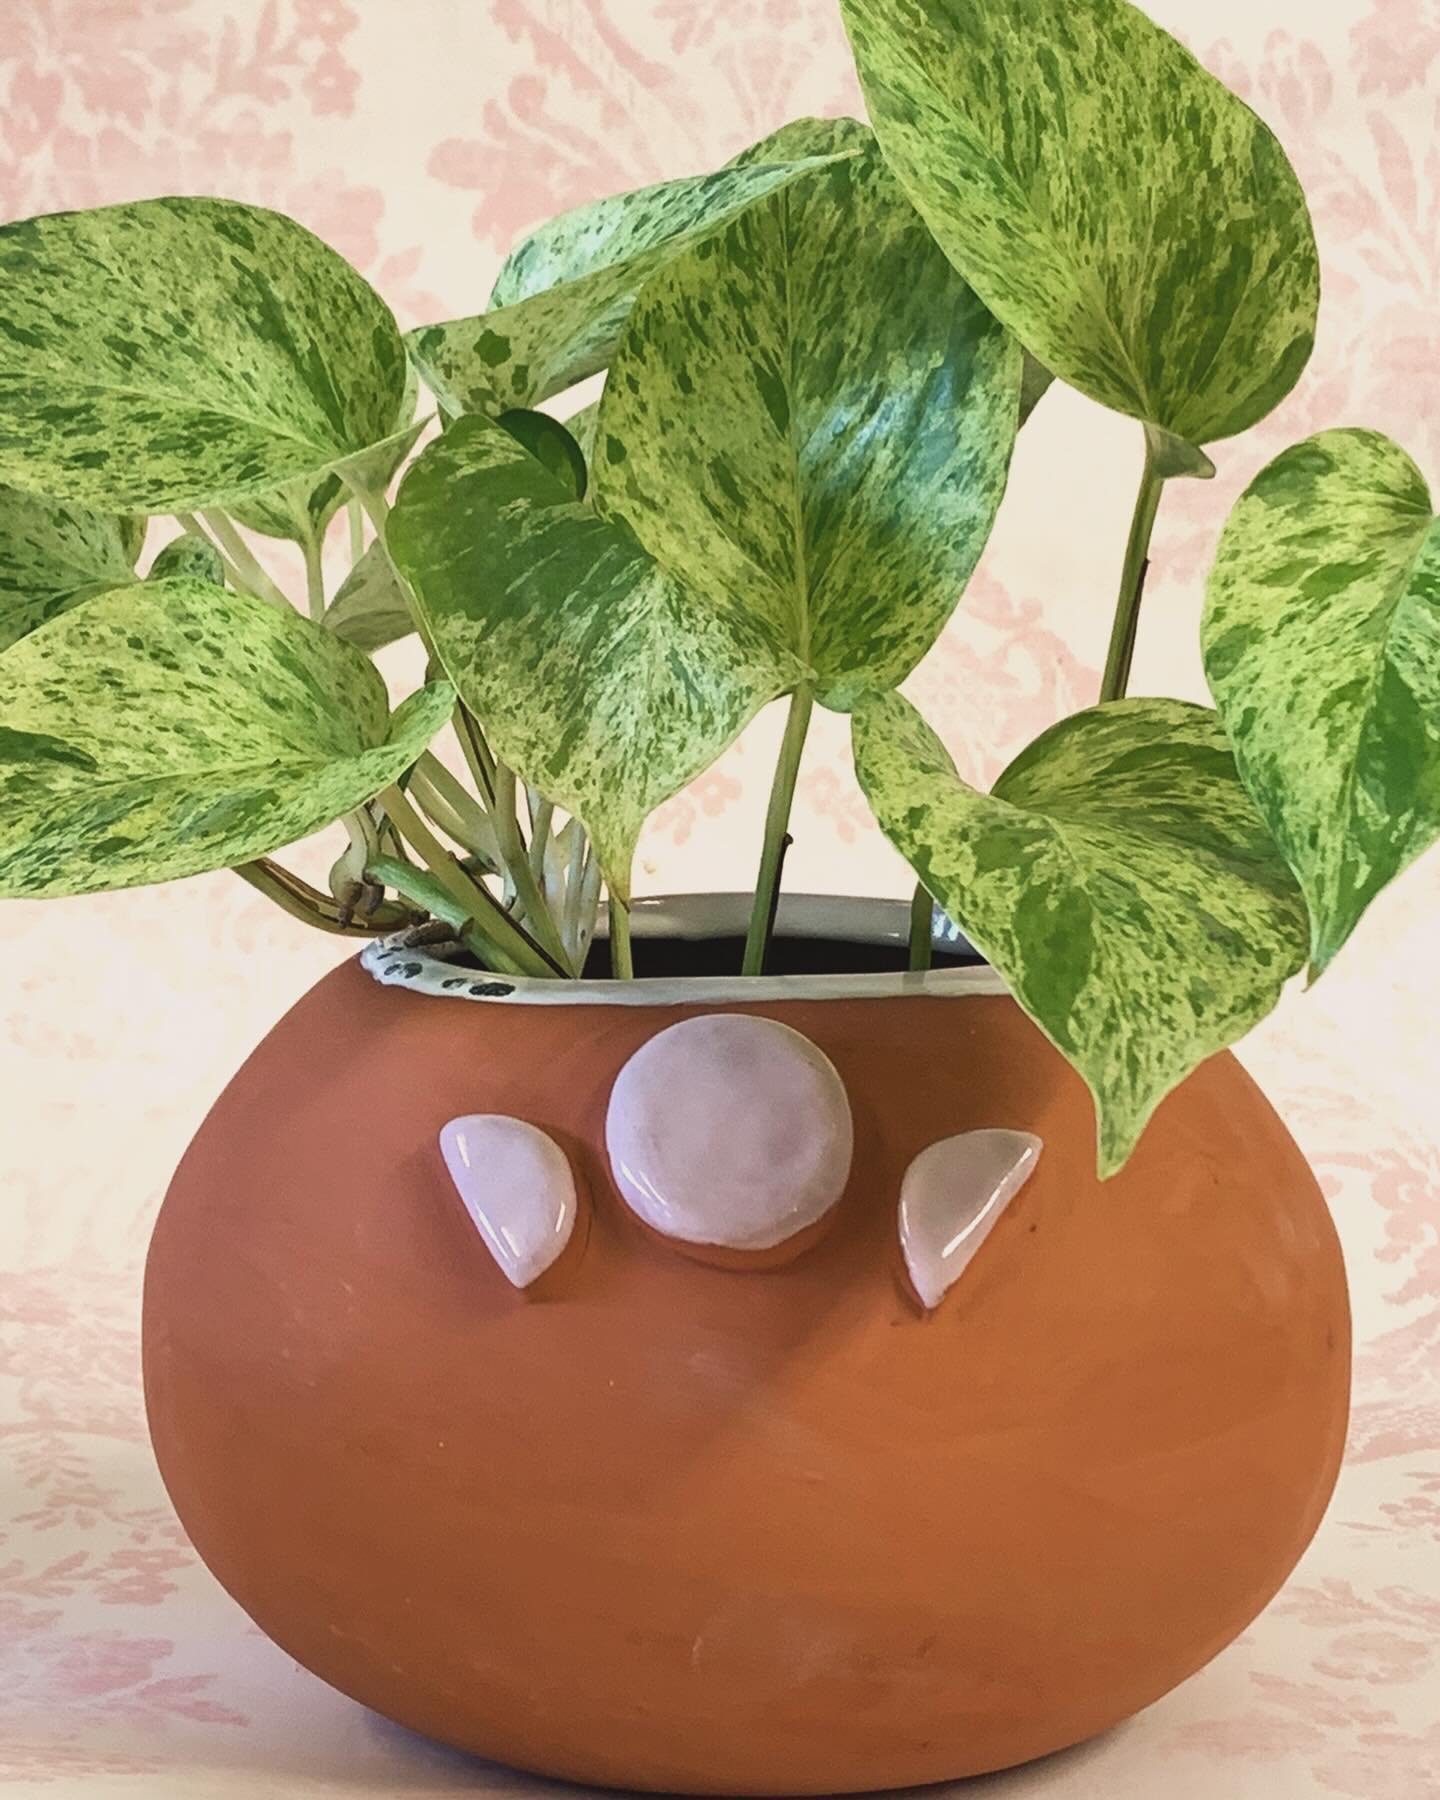 I have been digging into my archive for inspiration. 2020 pink moon planter. I think it&rsquo;s time to make some new magical terracotta planters. Don&rsquo;t ya think?!?
.
.
.#terracotta #handmade #pinkmoon #houseplants